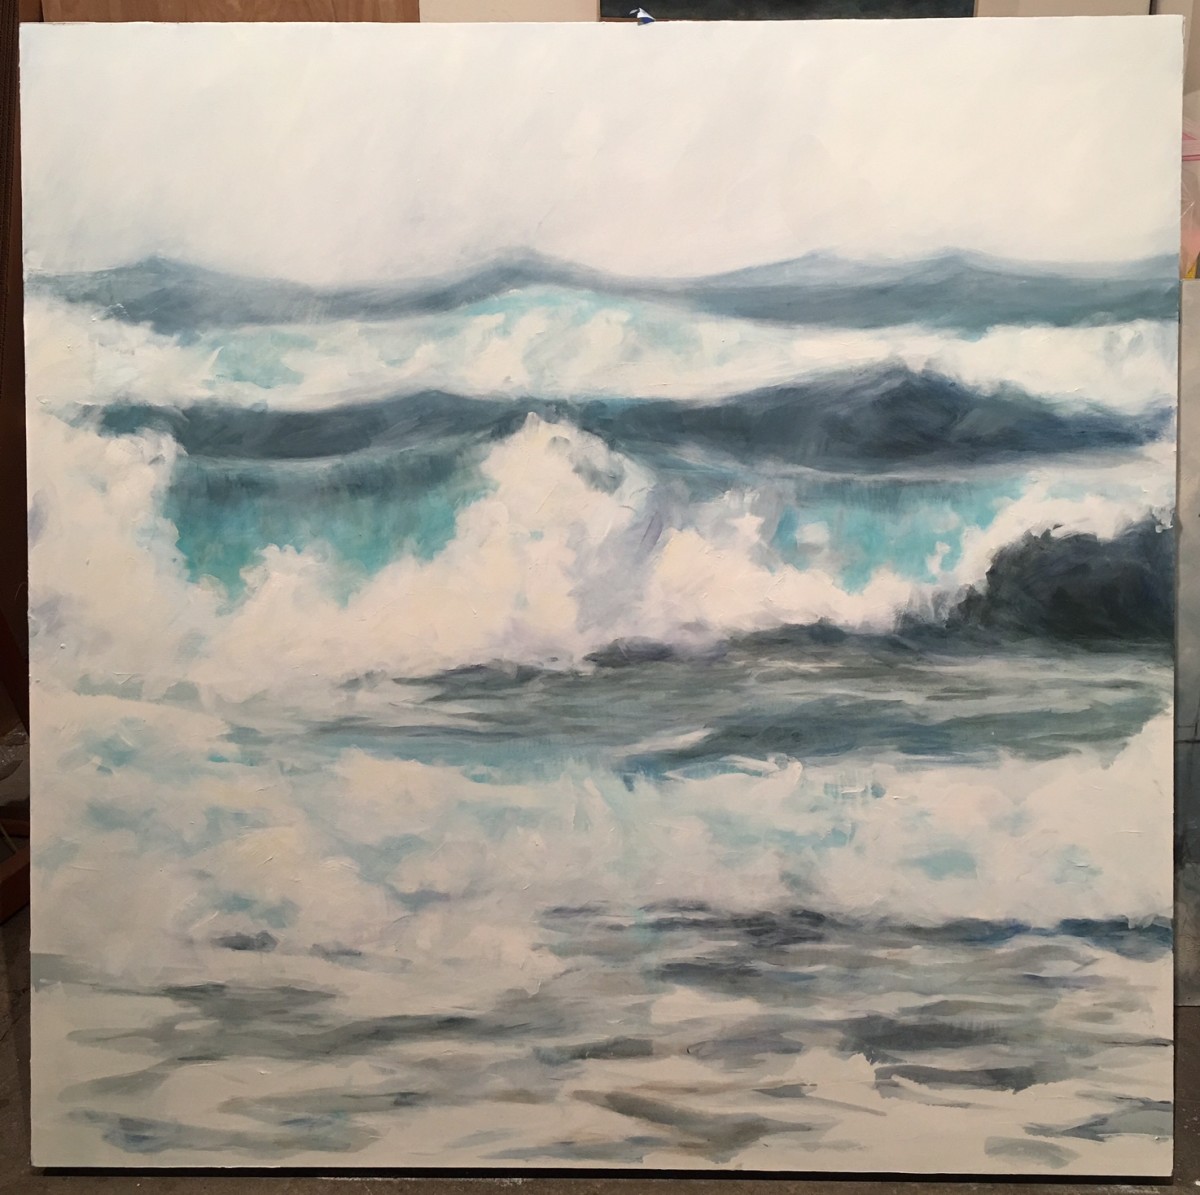 Sea Sky Series: Froth commission by Krista Machovina 